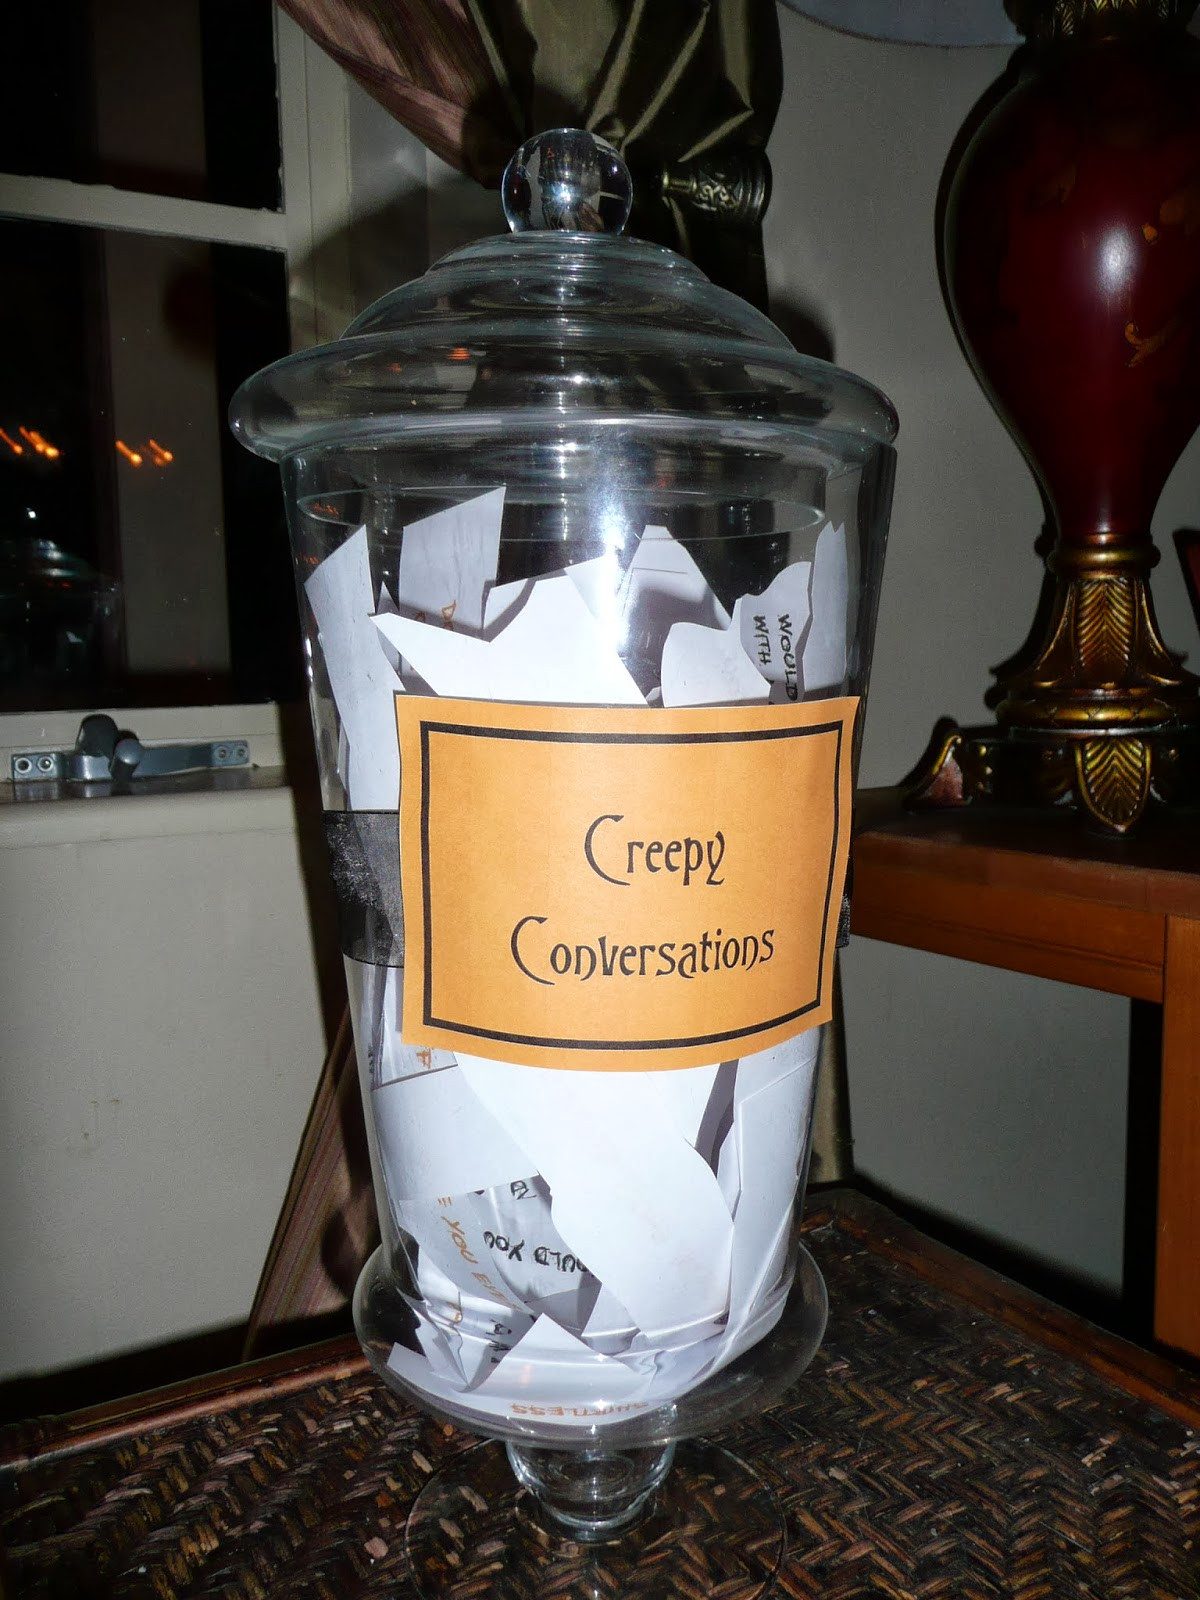 Halloween Party Games Ideas For Adults
 A Silly Whim "Creepy Conversations" Halloween Game